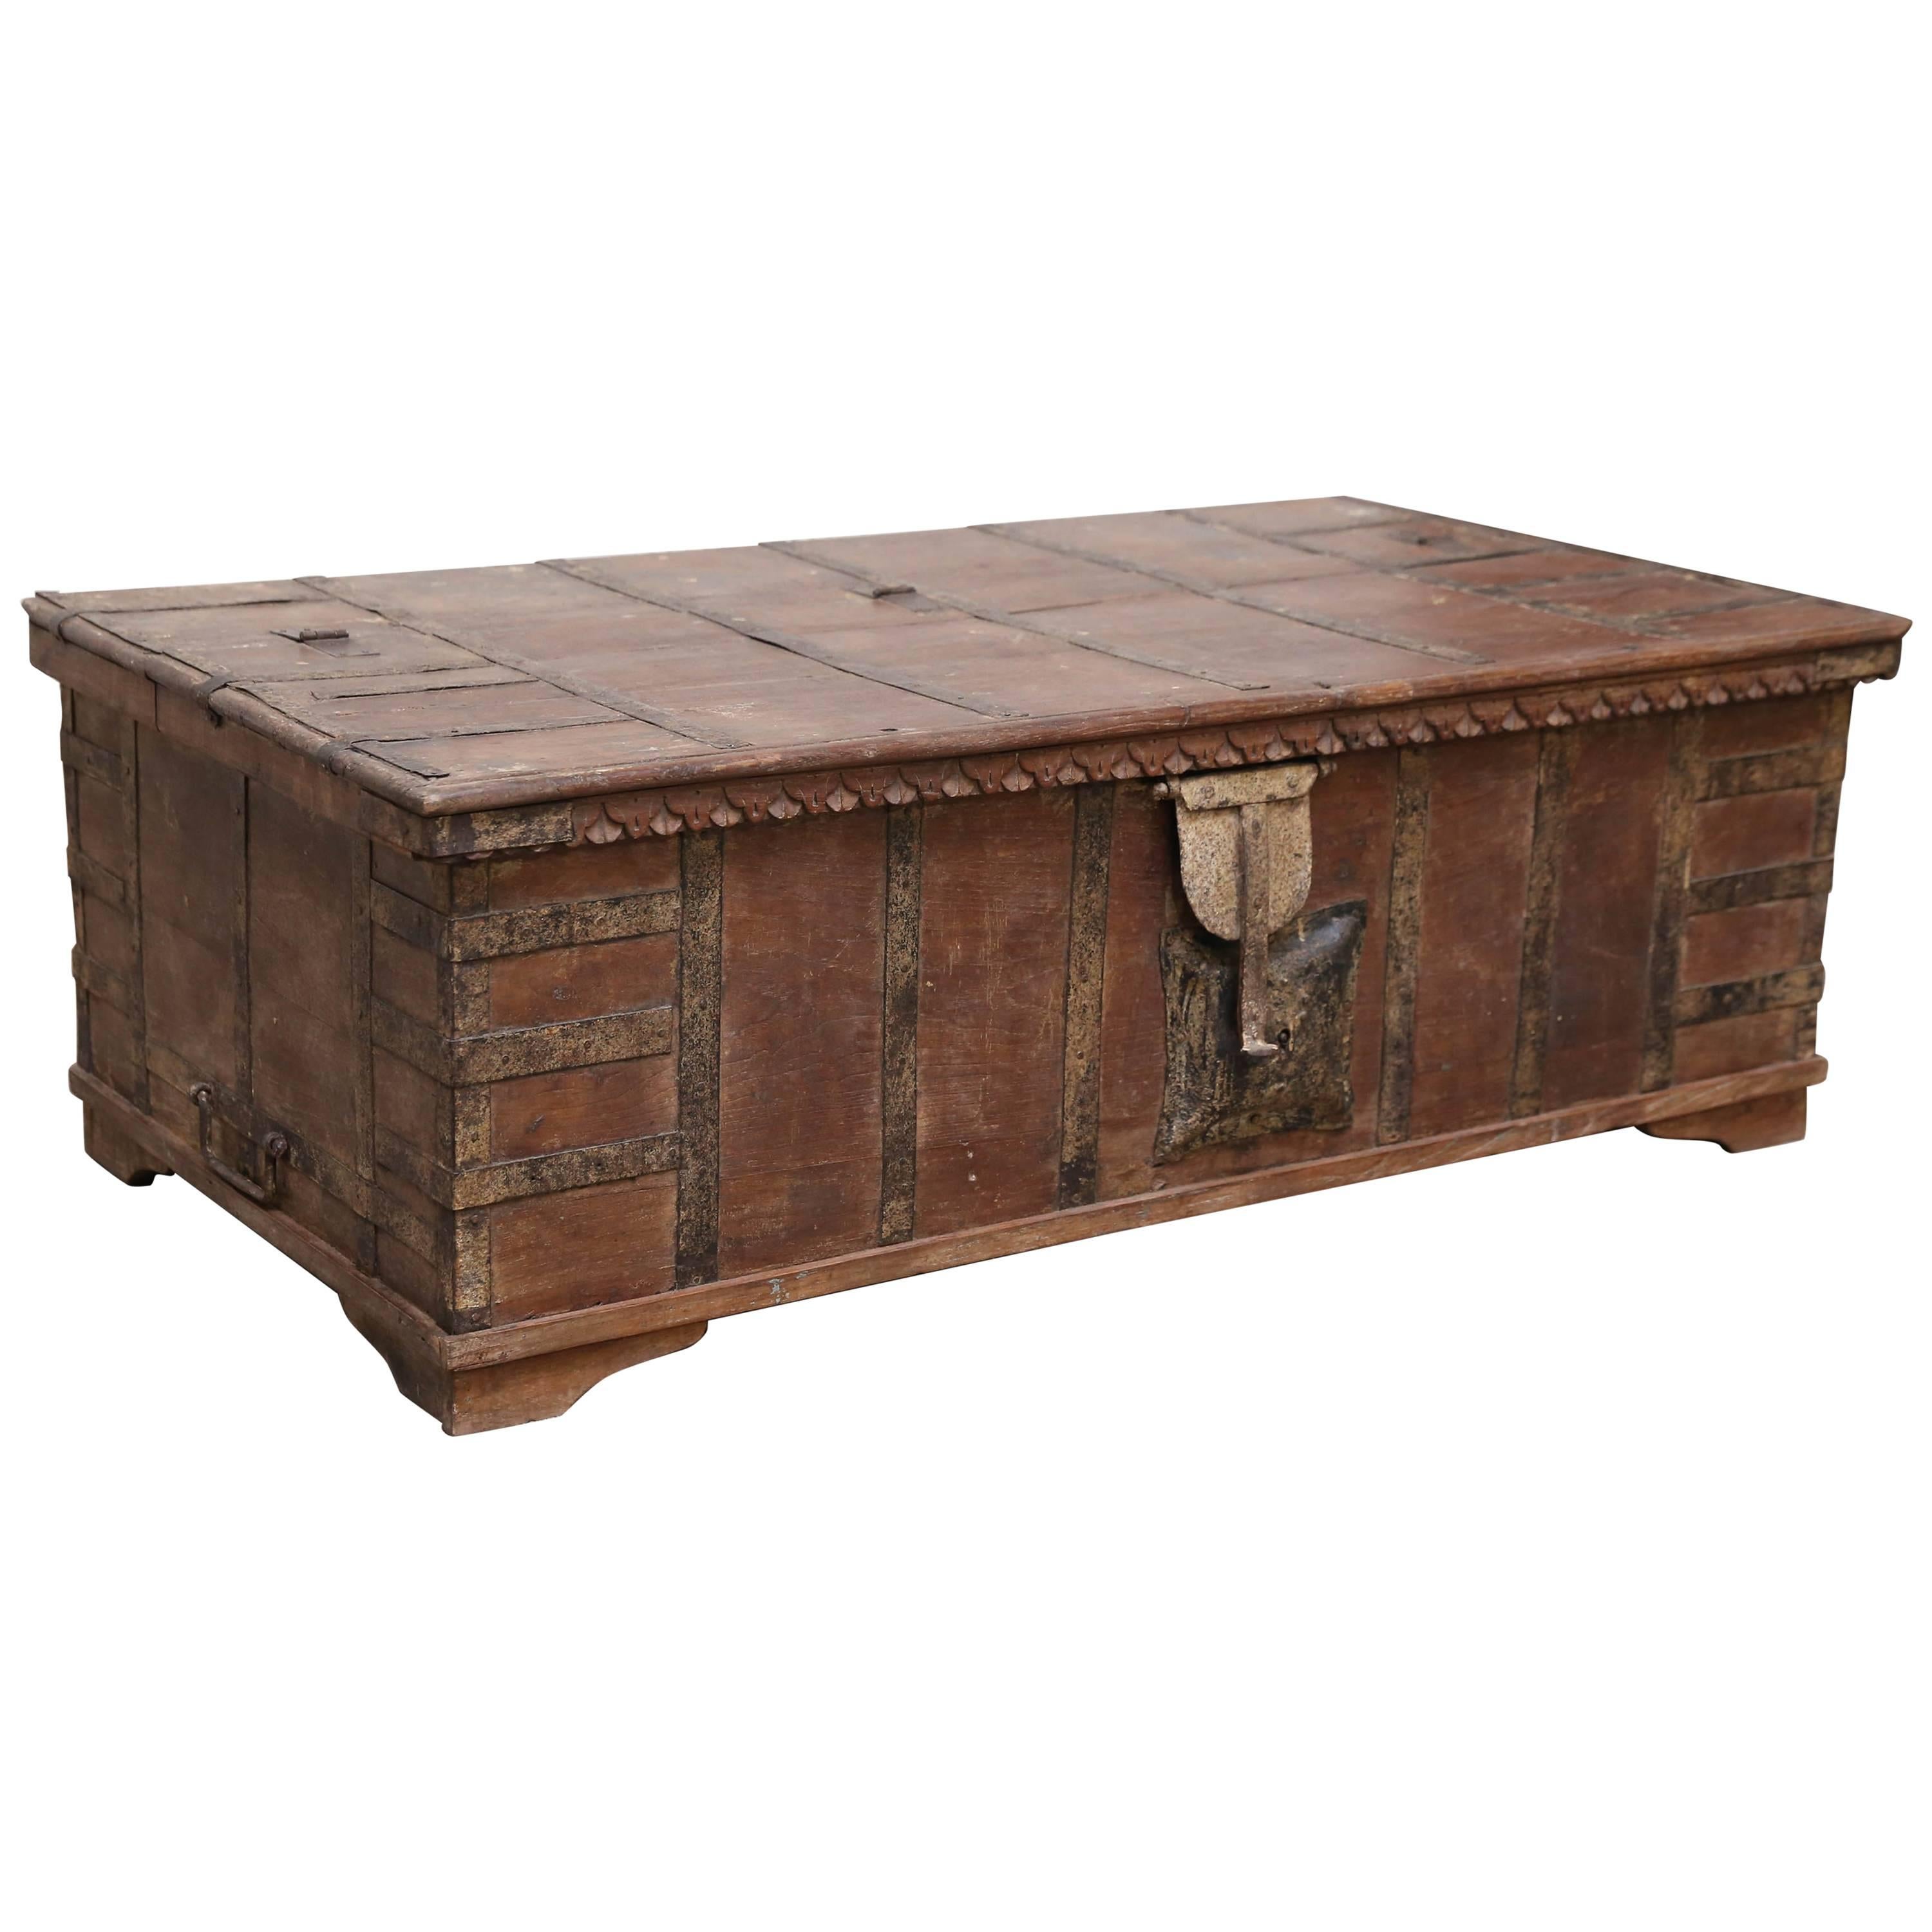 1820s Solid Teak Wood Dowry Chest from Central India For Sale